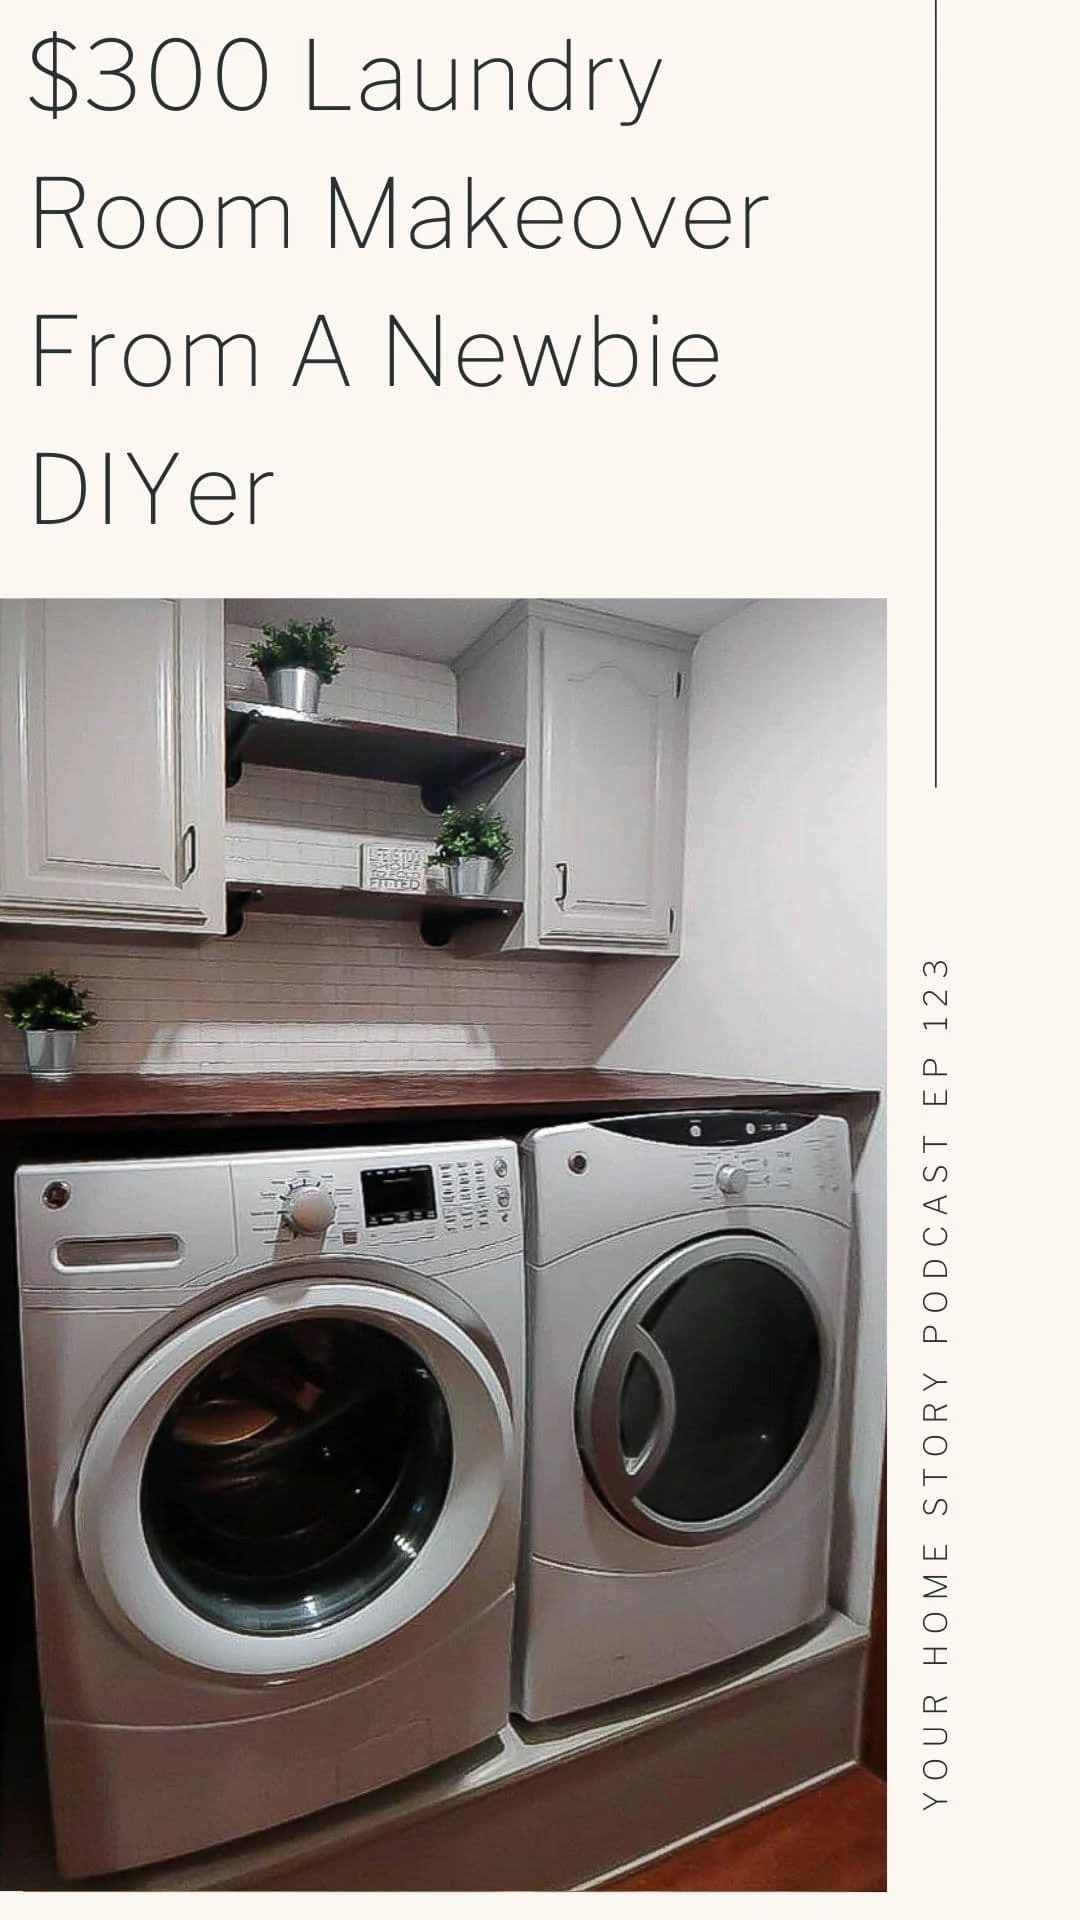 $300 laundry room makeover from a Newbie DIYer